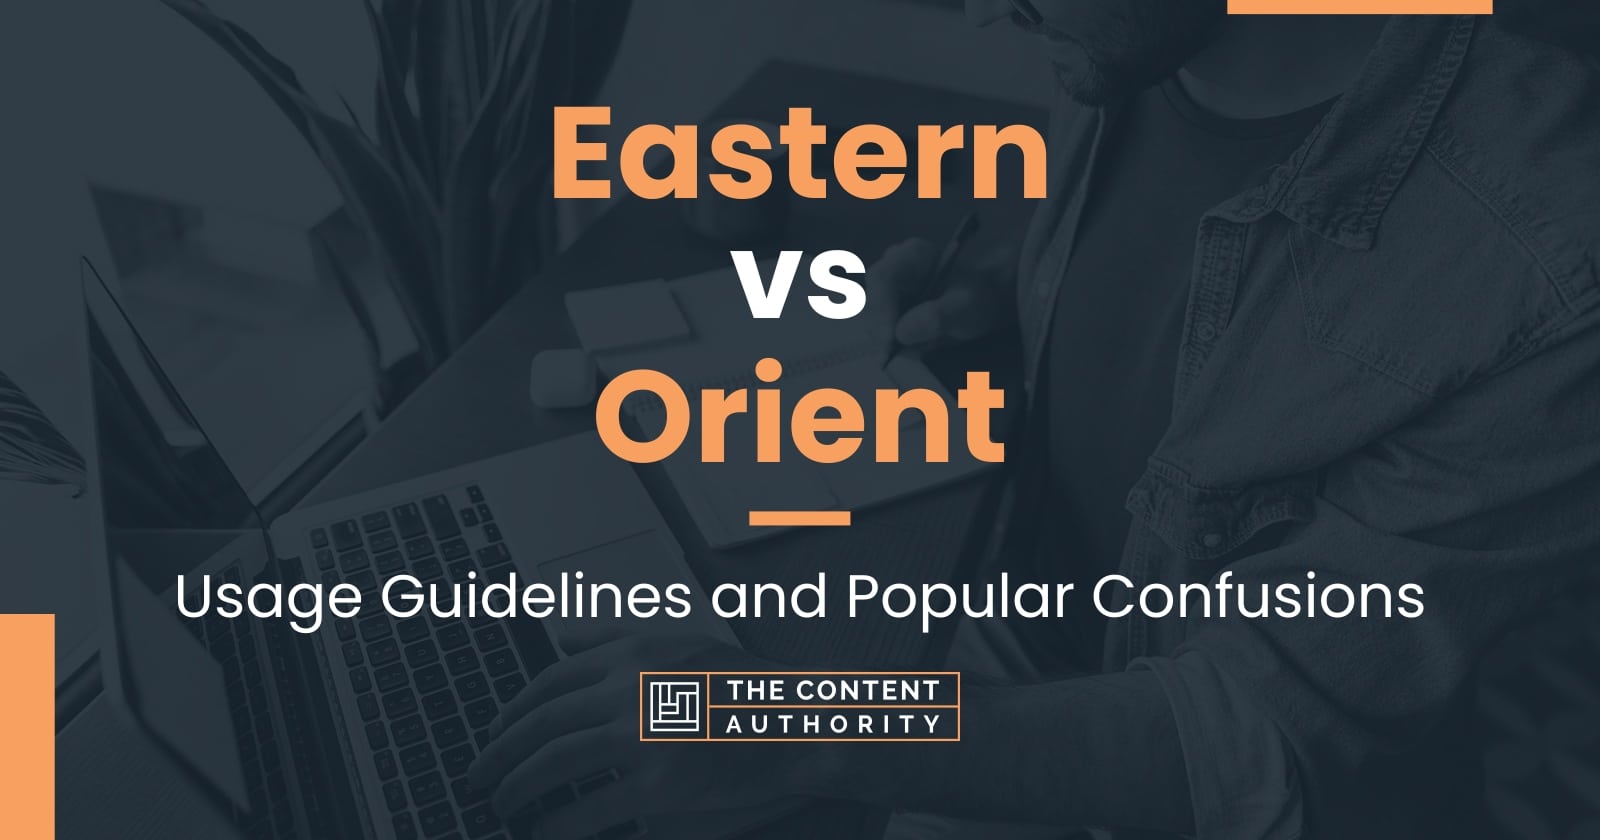 Eastern vs Orient: Usage Guidelines and Popular Confusions